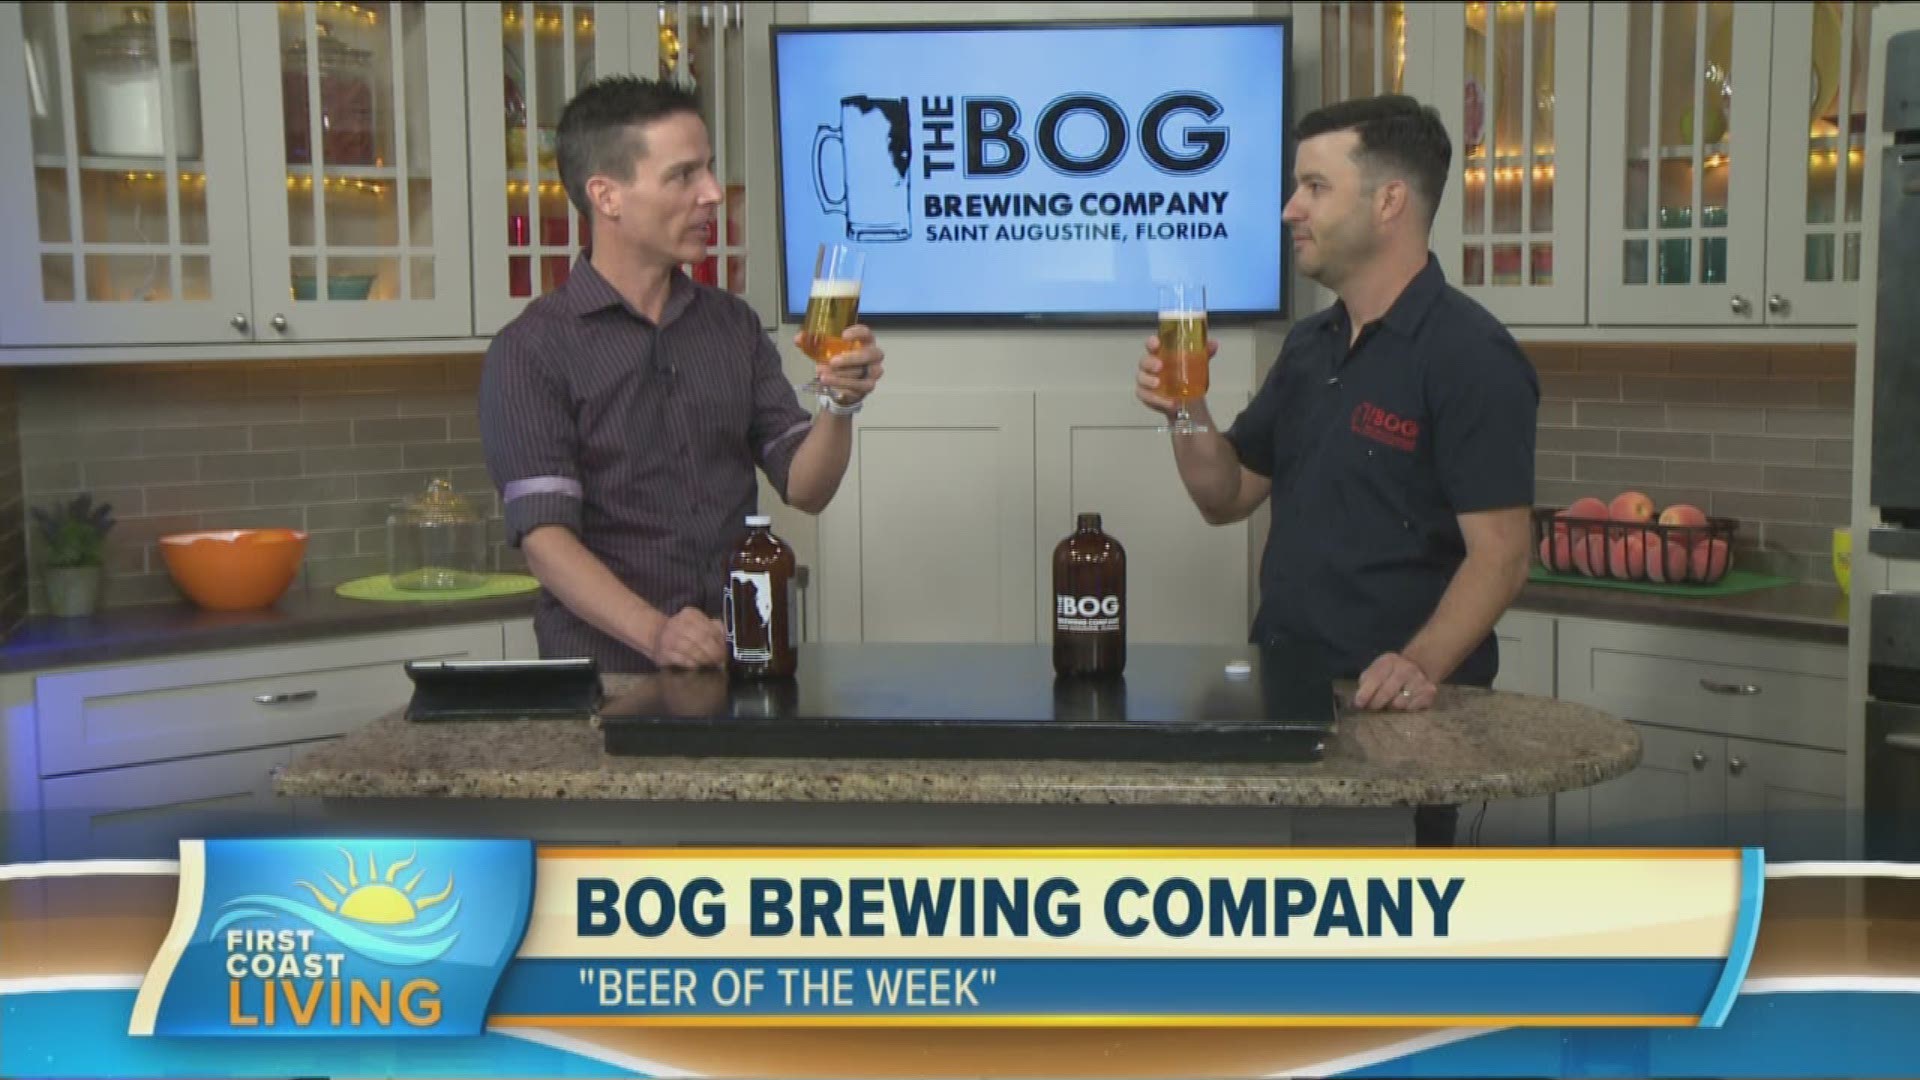 Don't get 'bogged' down with all the beer options out there. Try this week's pick of Beer of the Week!